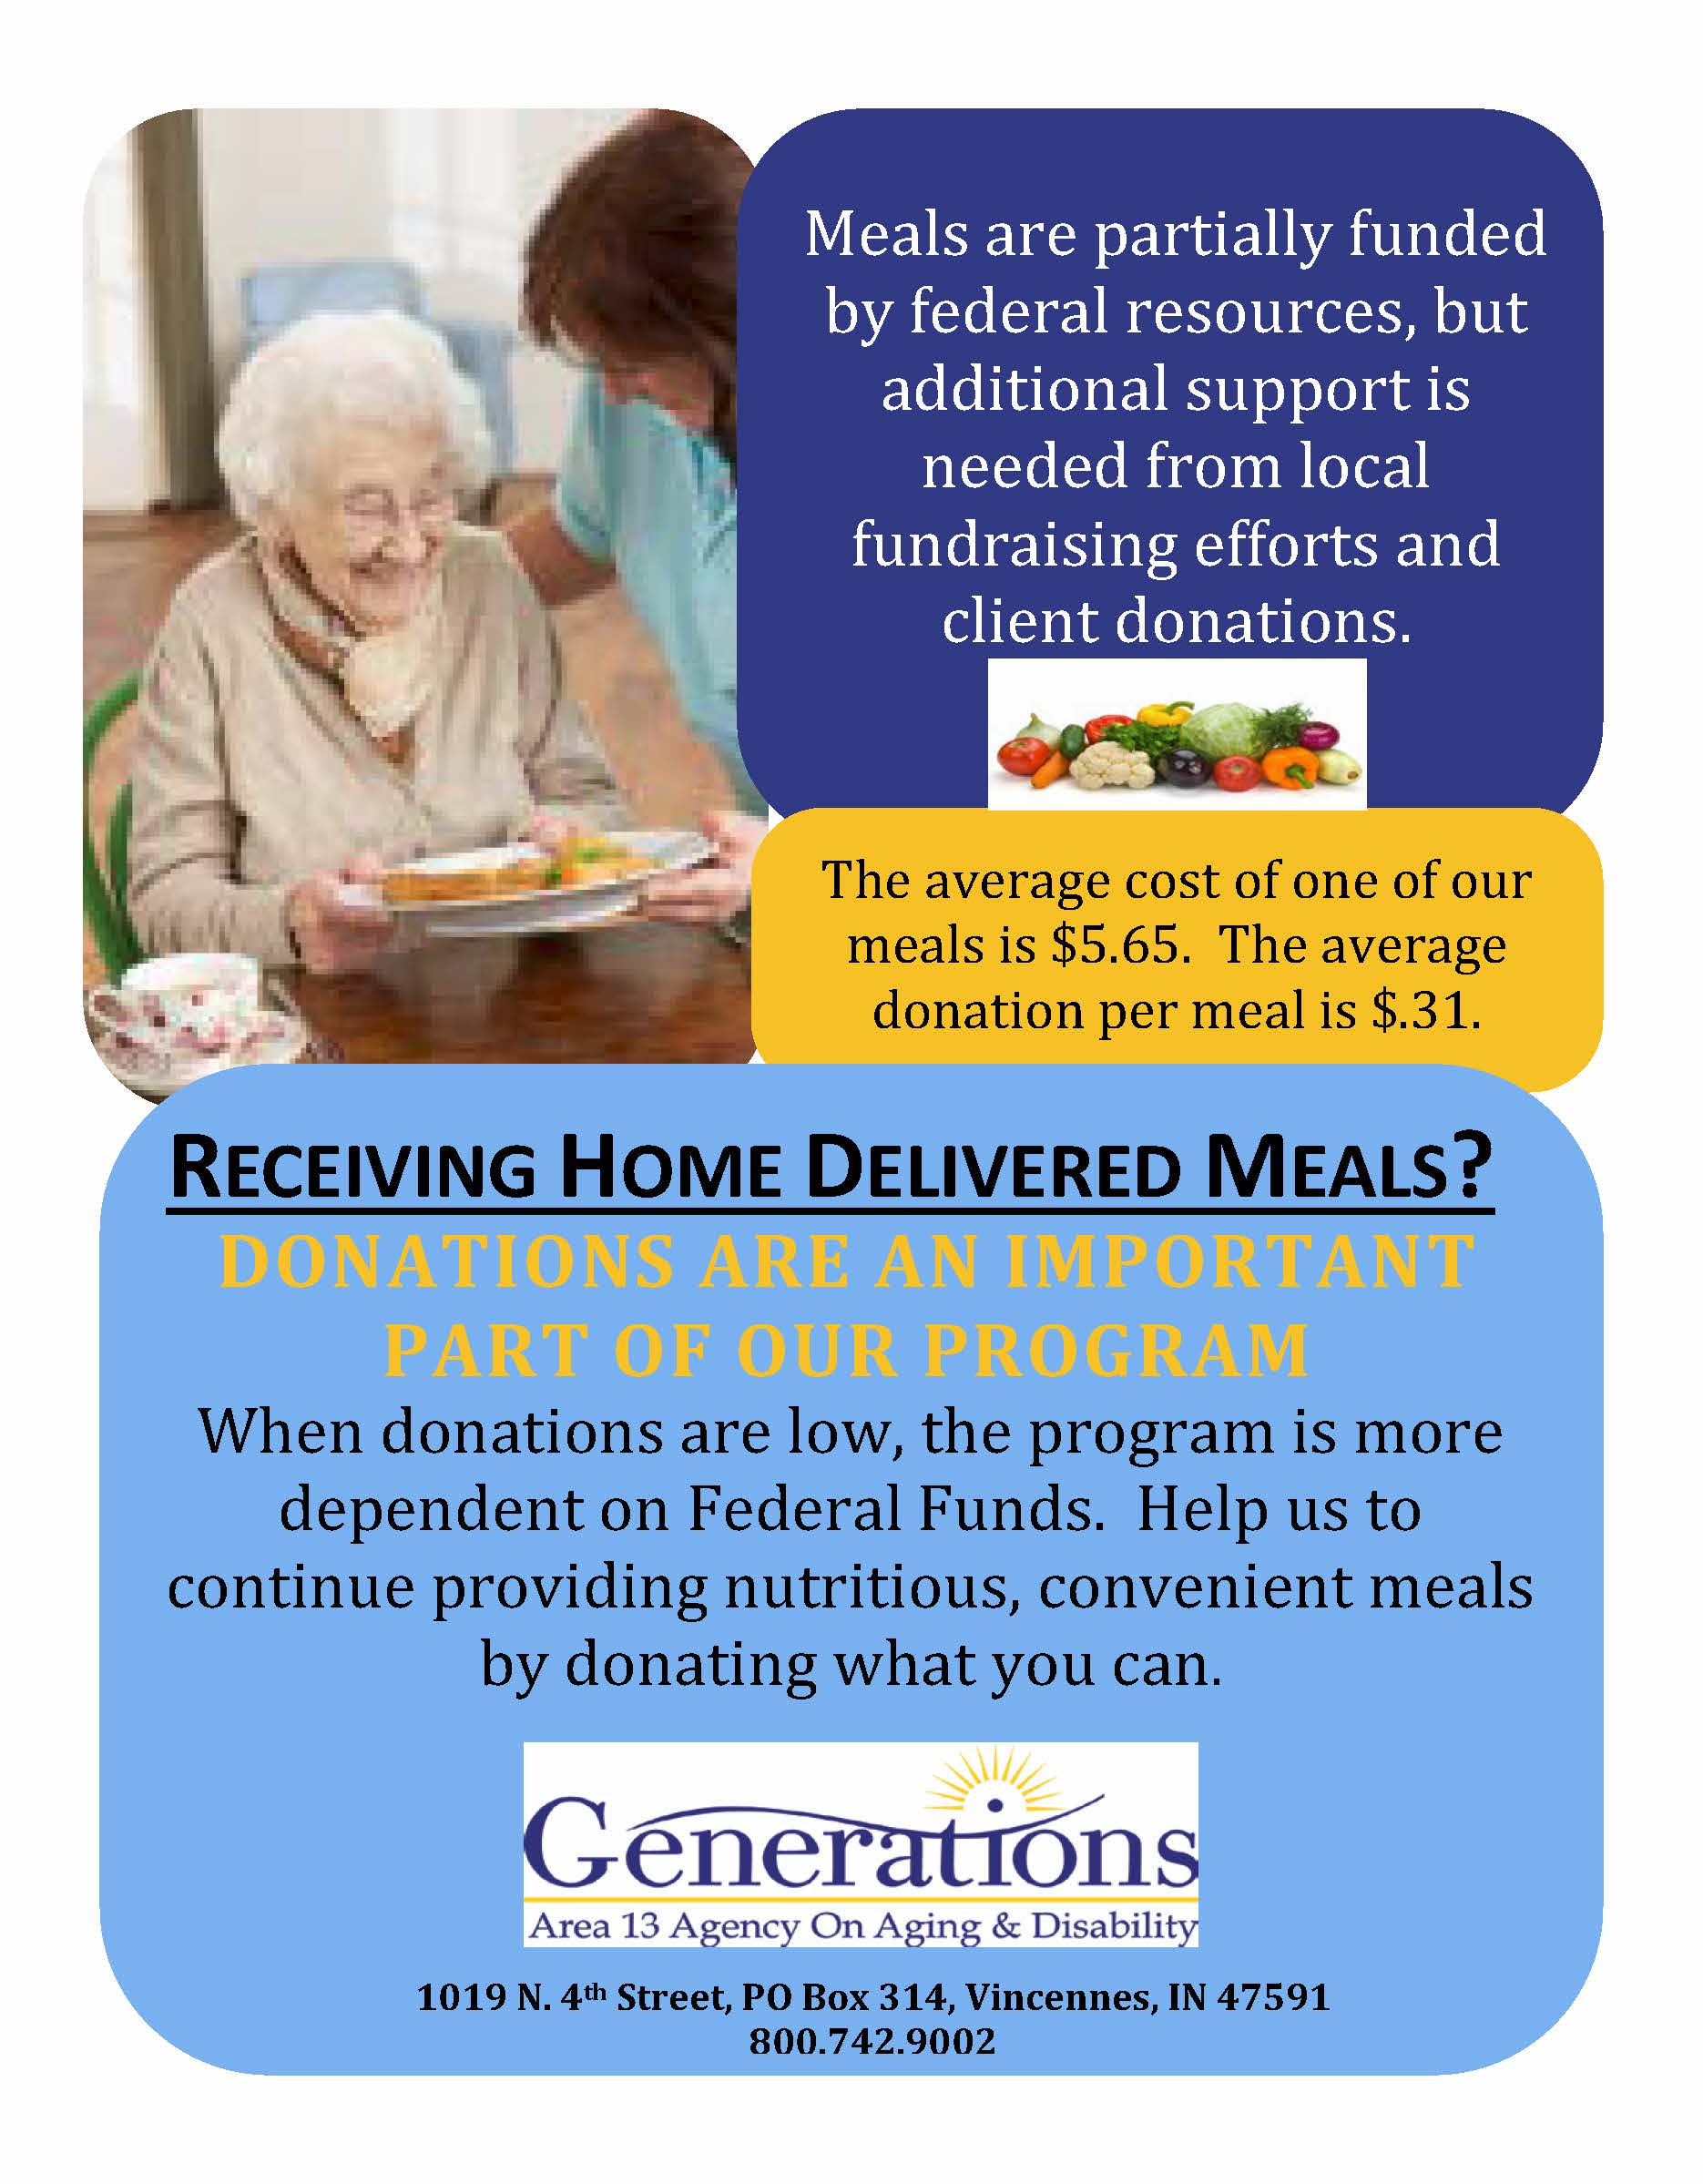 How much does a meal cost from Meals on Wheels?